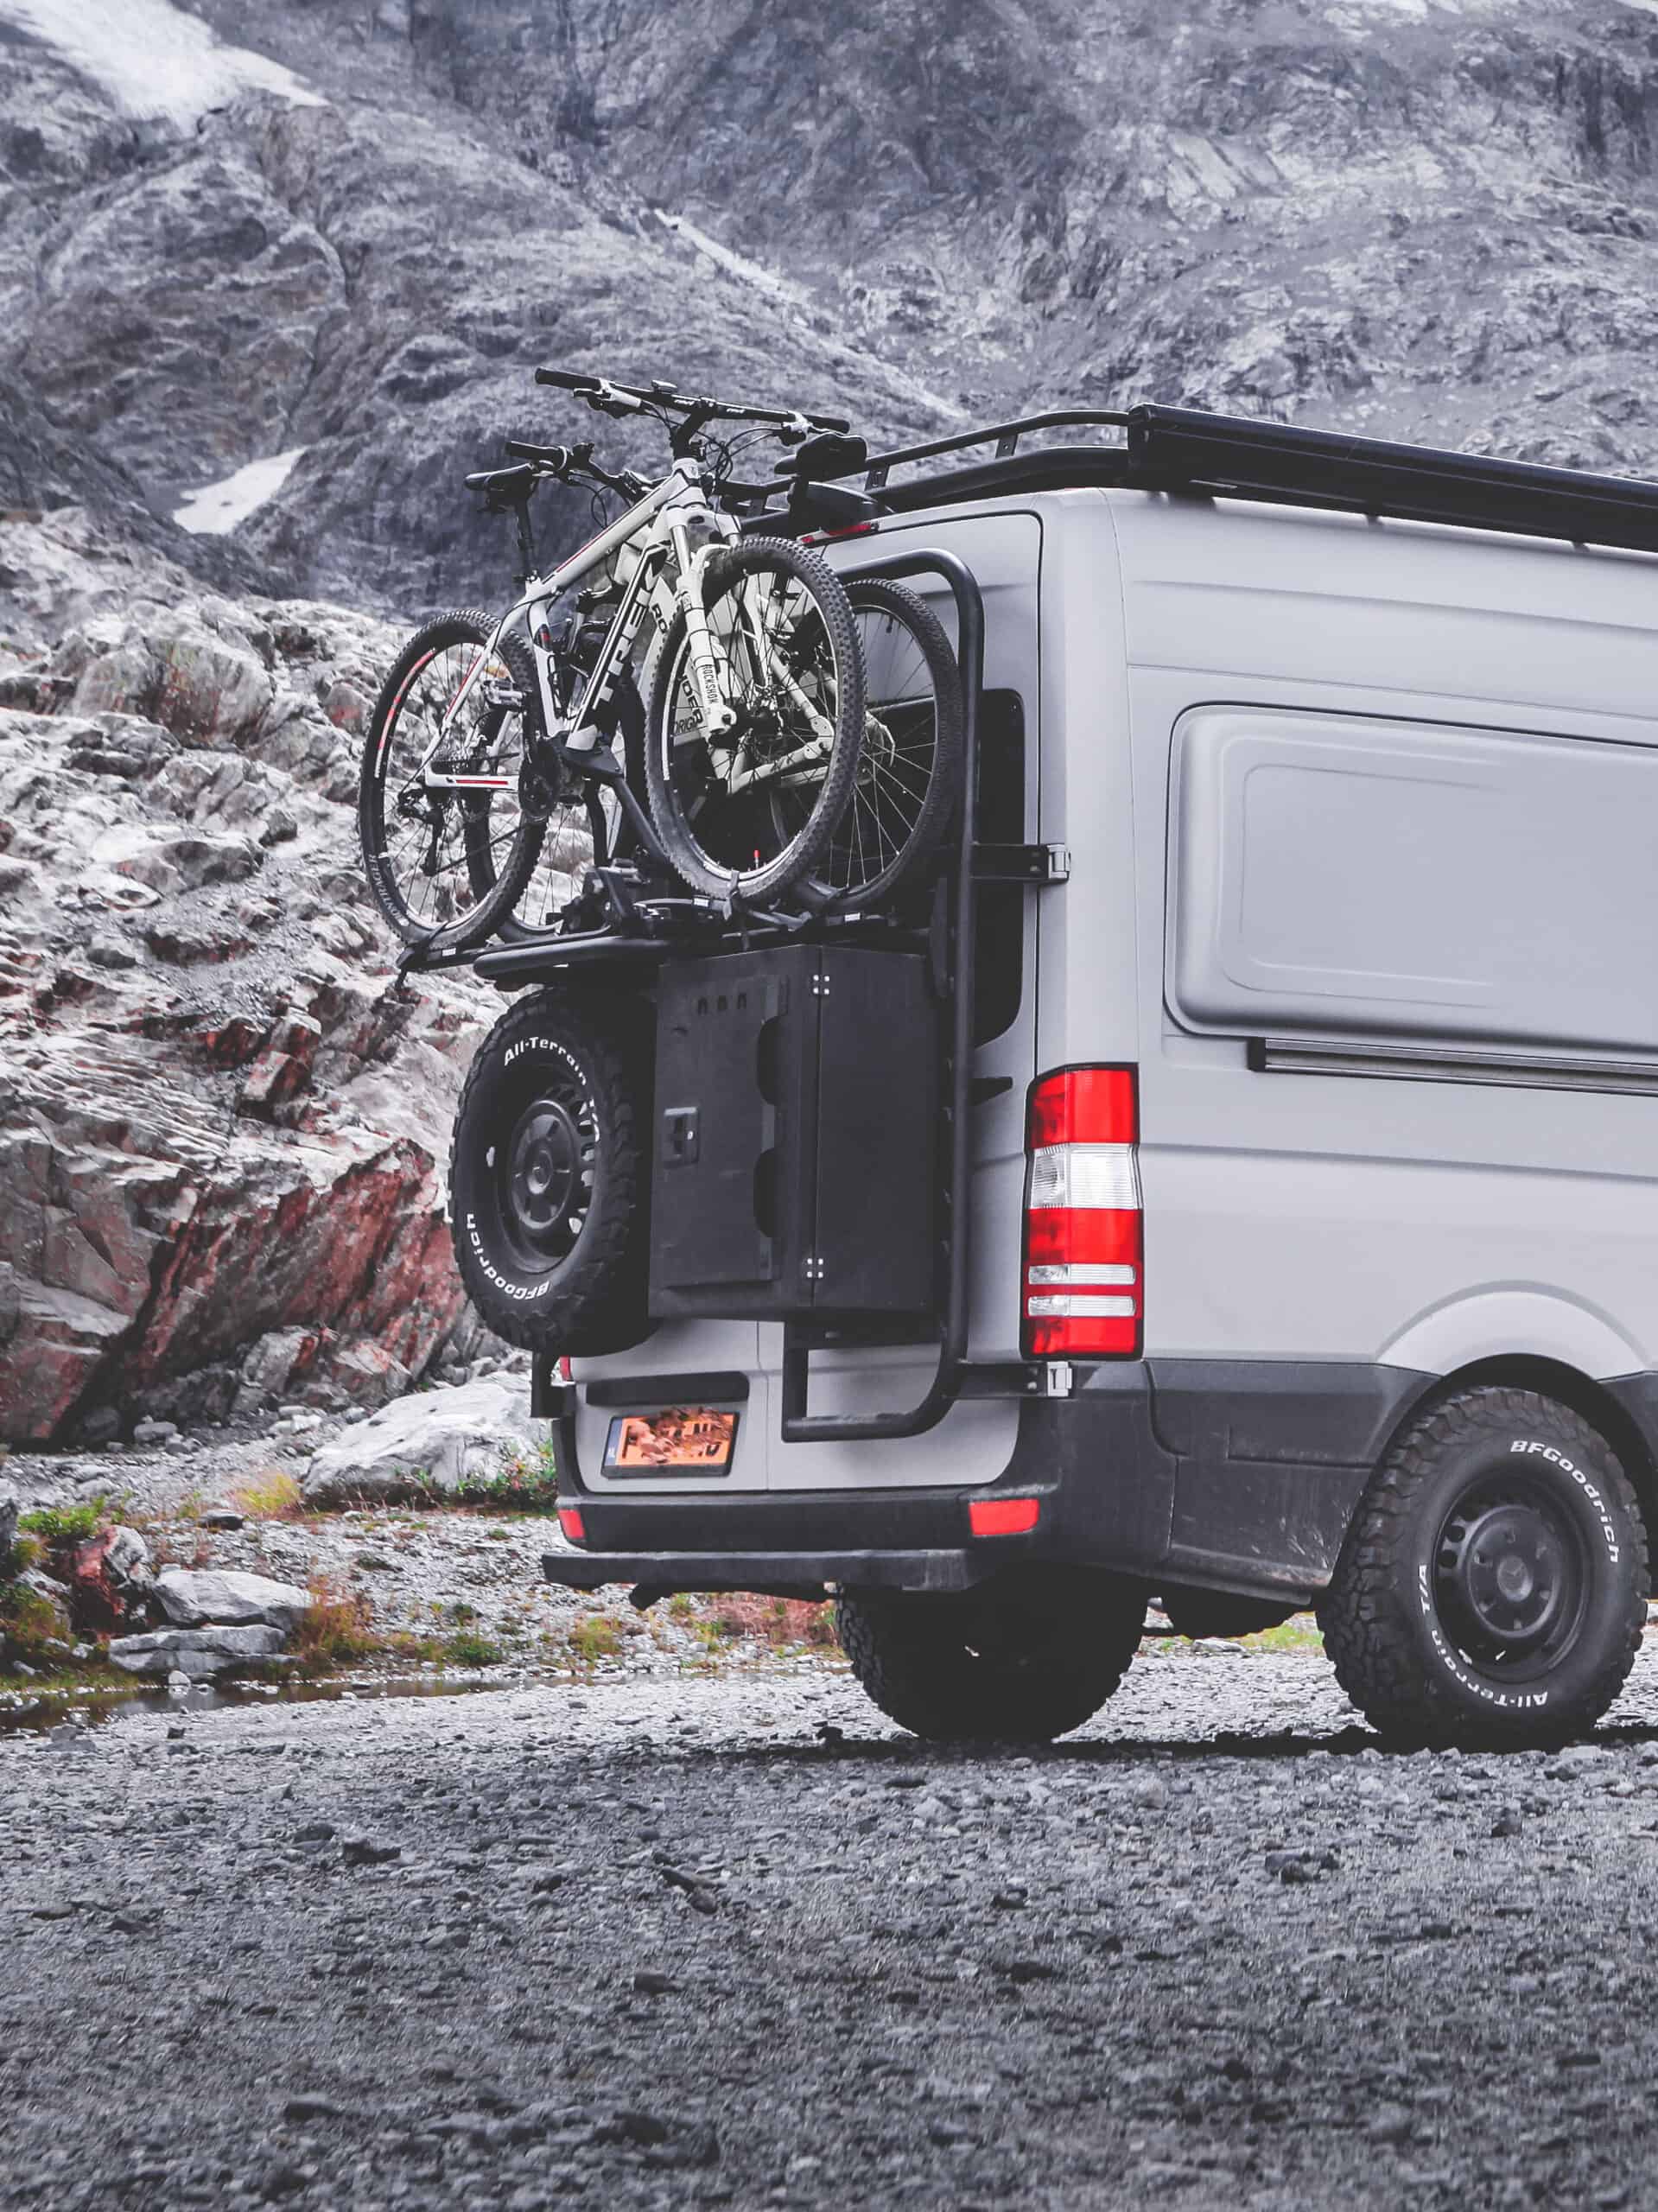 The rear part of a W906 fully grey raptored Sprinter van. The rear of the van is equipped with black powdercoated, aluminium exterior gear. Such as a Tire Carrier, Cargo Ladder, Cargo Box and a Cargo Frame carrying two mountainbikes. In the backgroudn you see rocky Swiss mountain terrain.